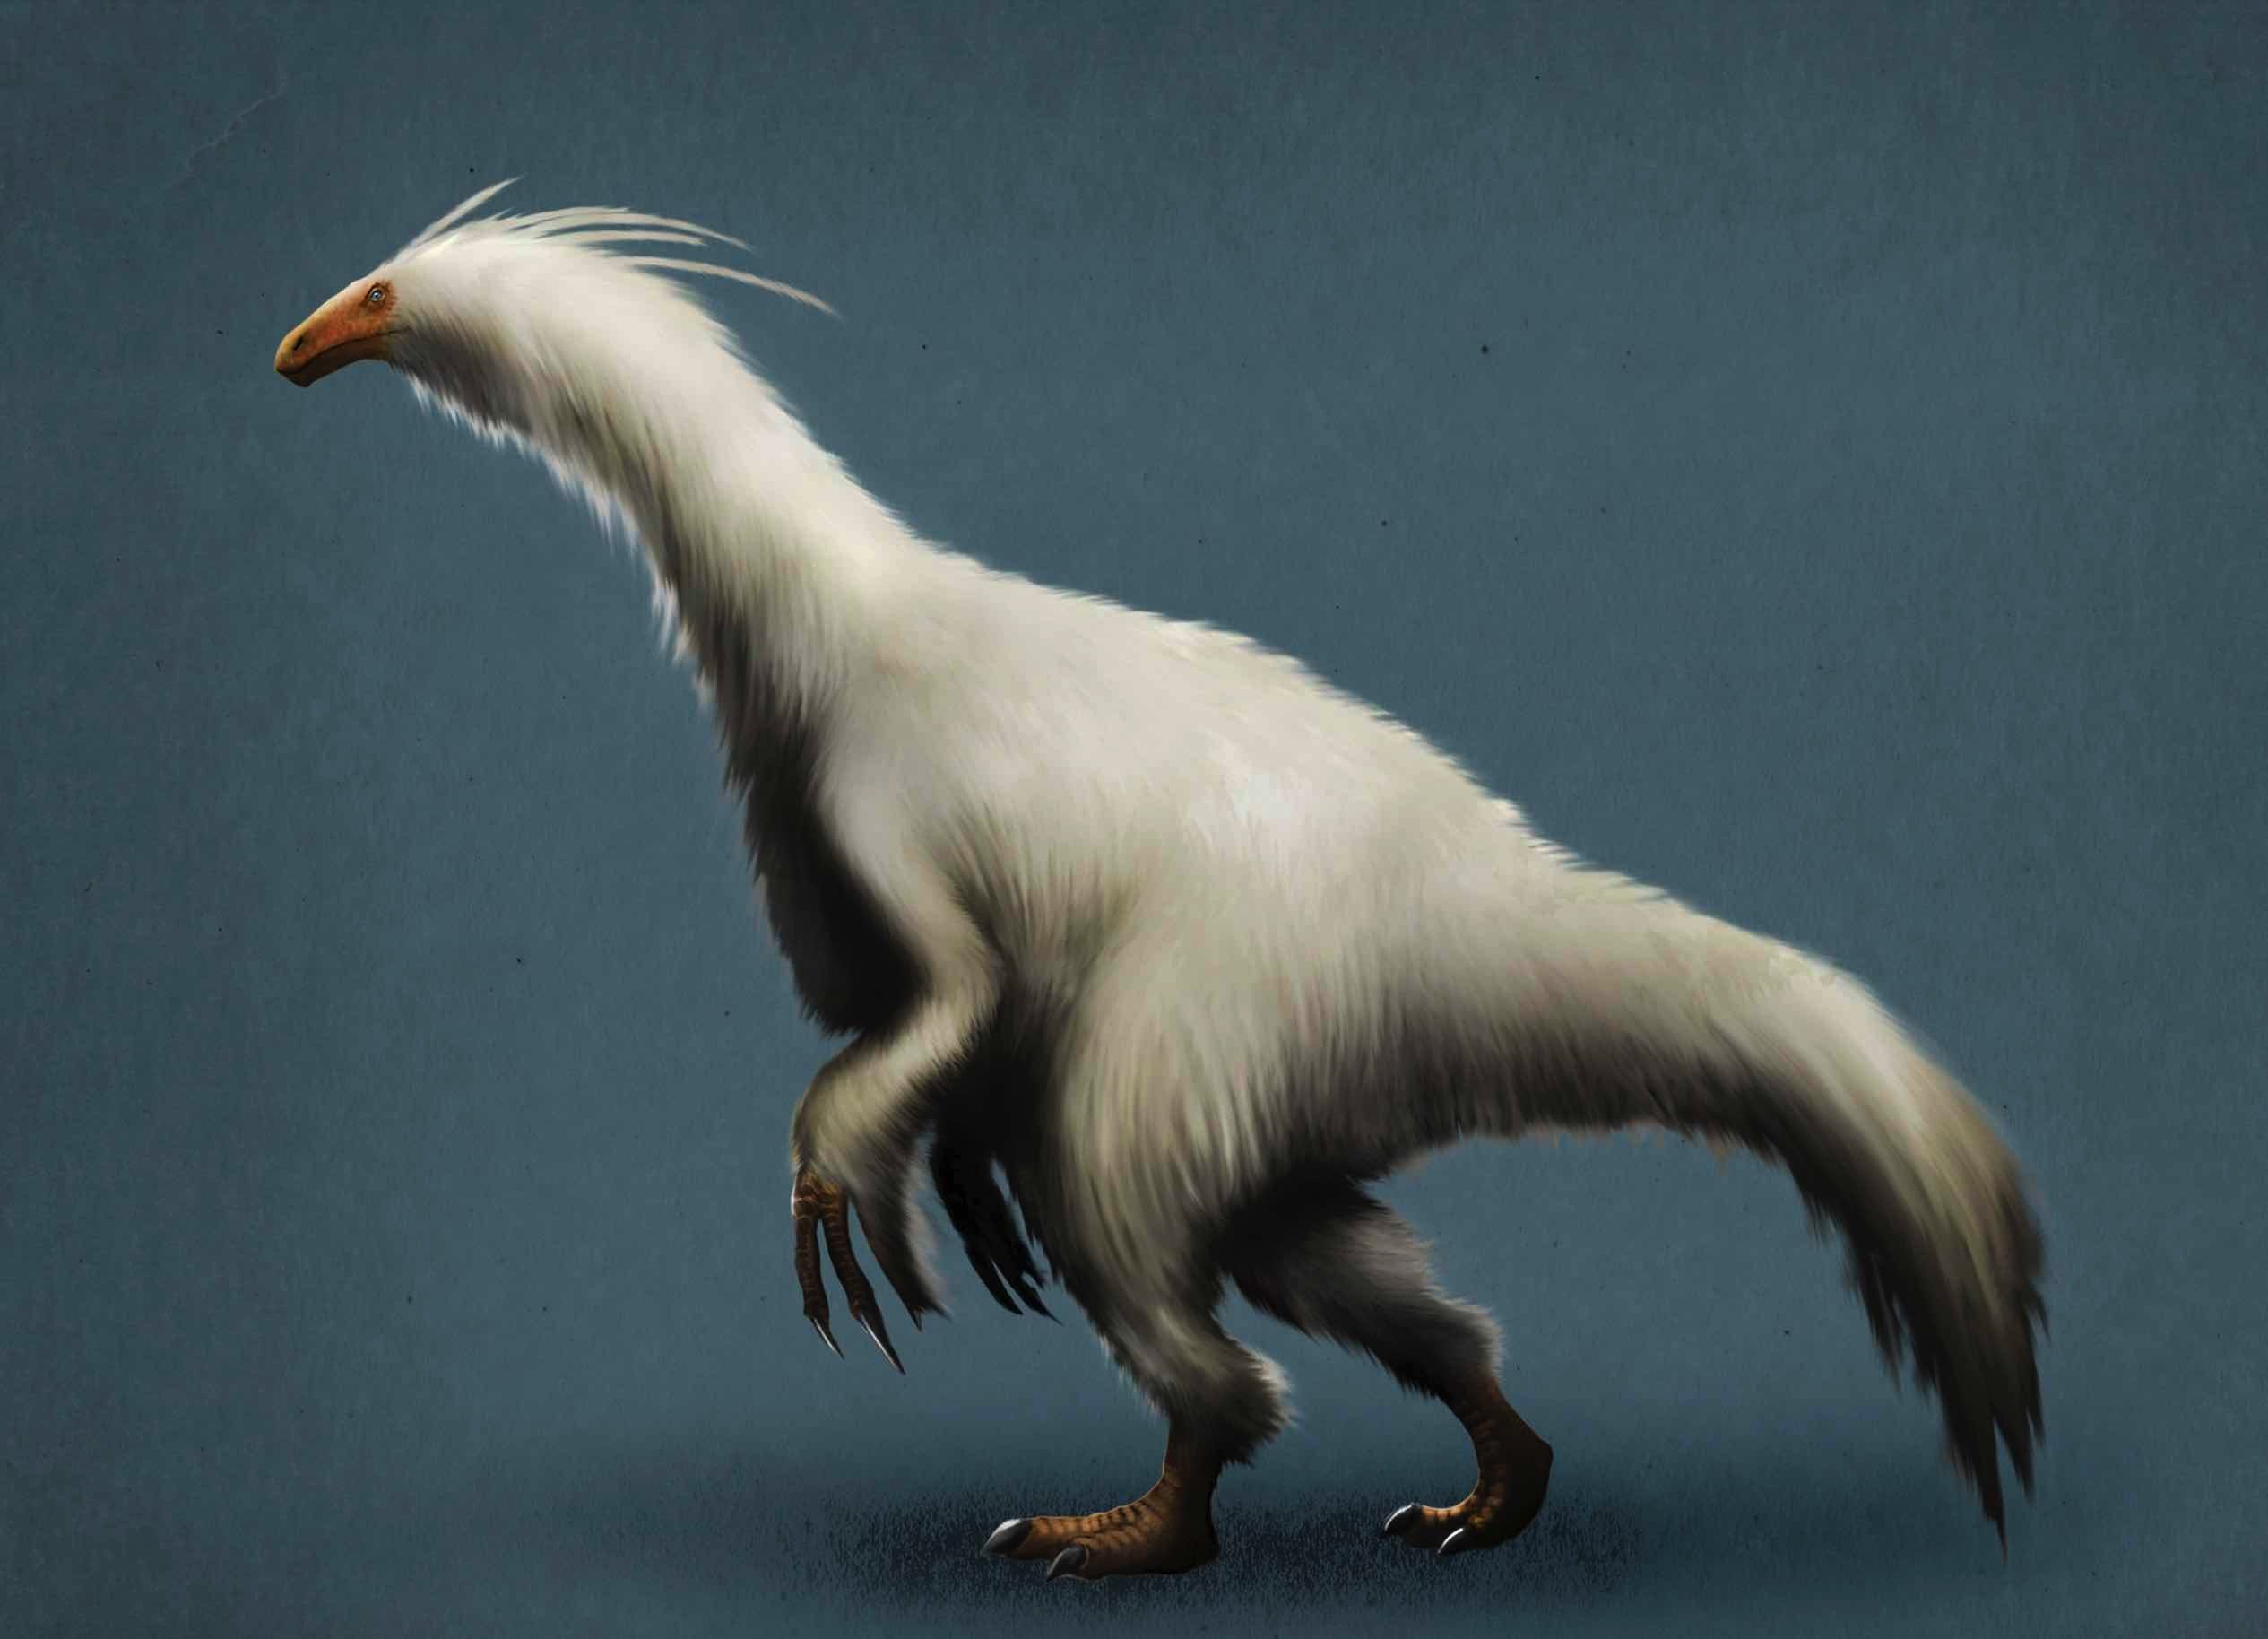 Illustration of an Therizinosaurus , a dinosaur standing on rear legs with a yellow beak-like face and white downy feathers covering its body